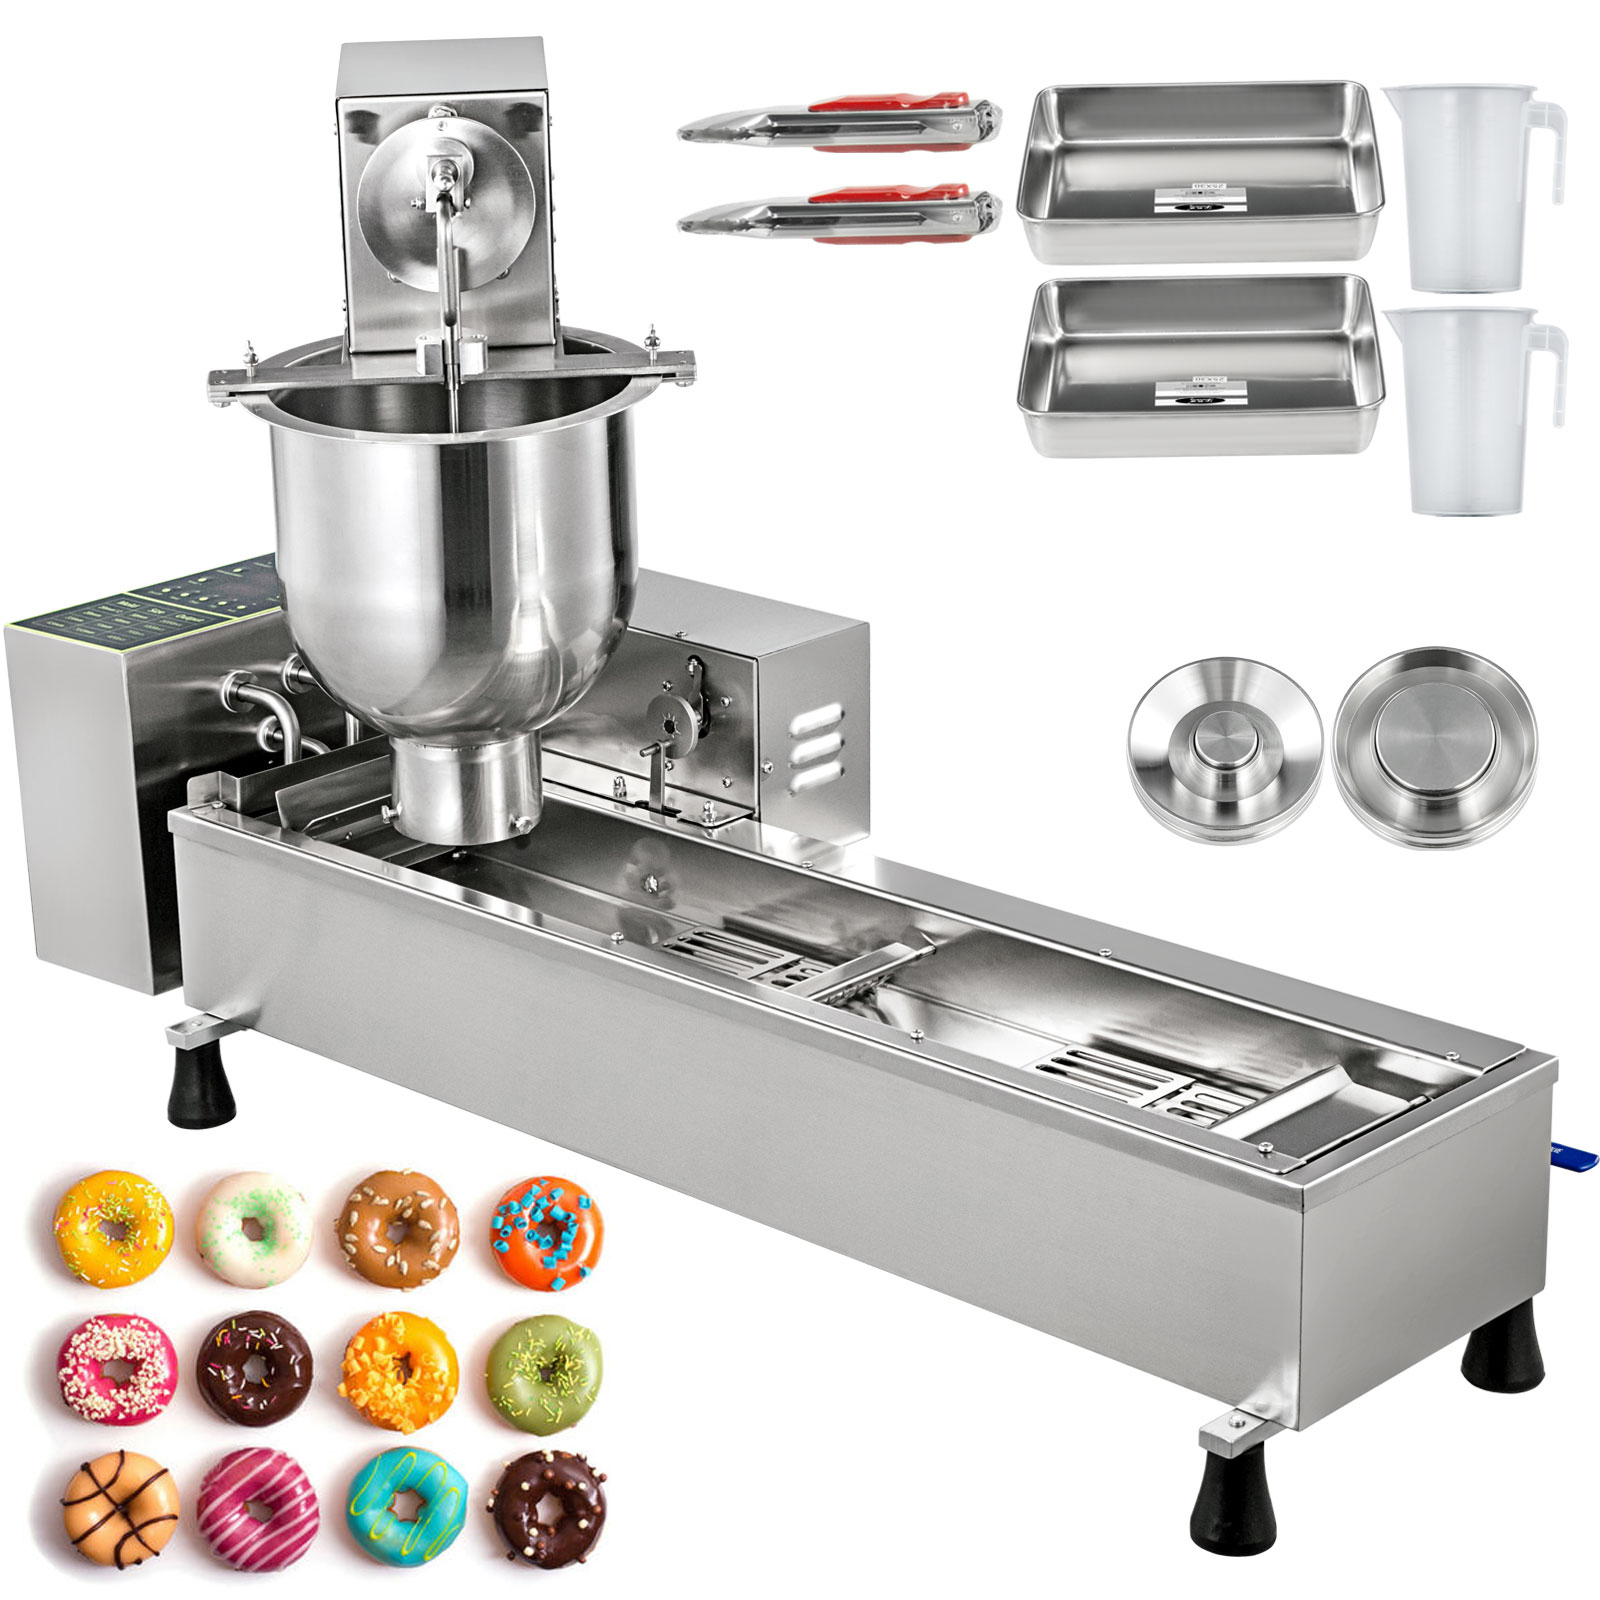 Commercial Doughnut Maker Automatic Donut Maker Making Machine 3 Size Of Molds от Vevor Many GEOs